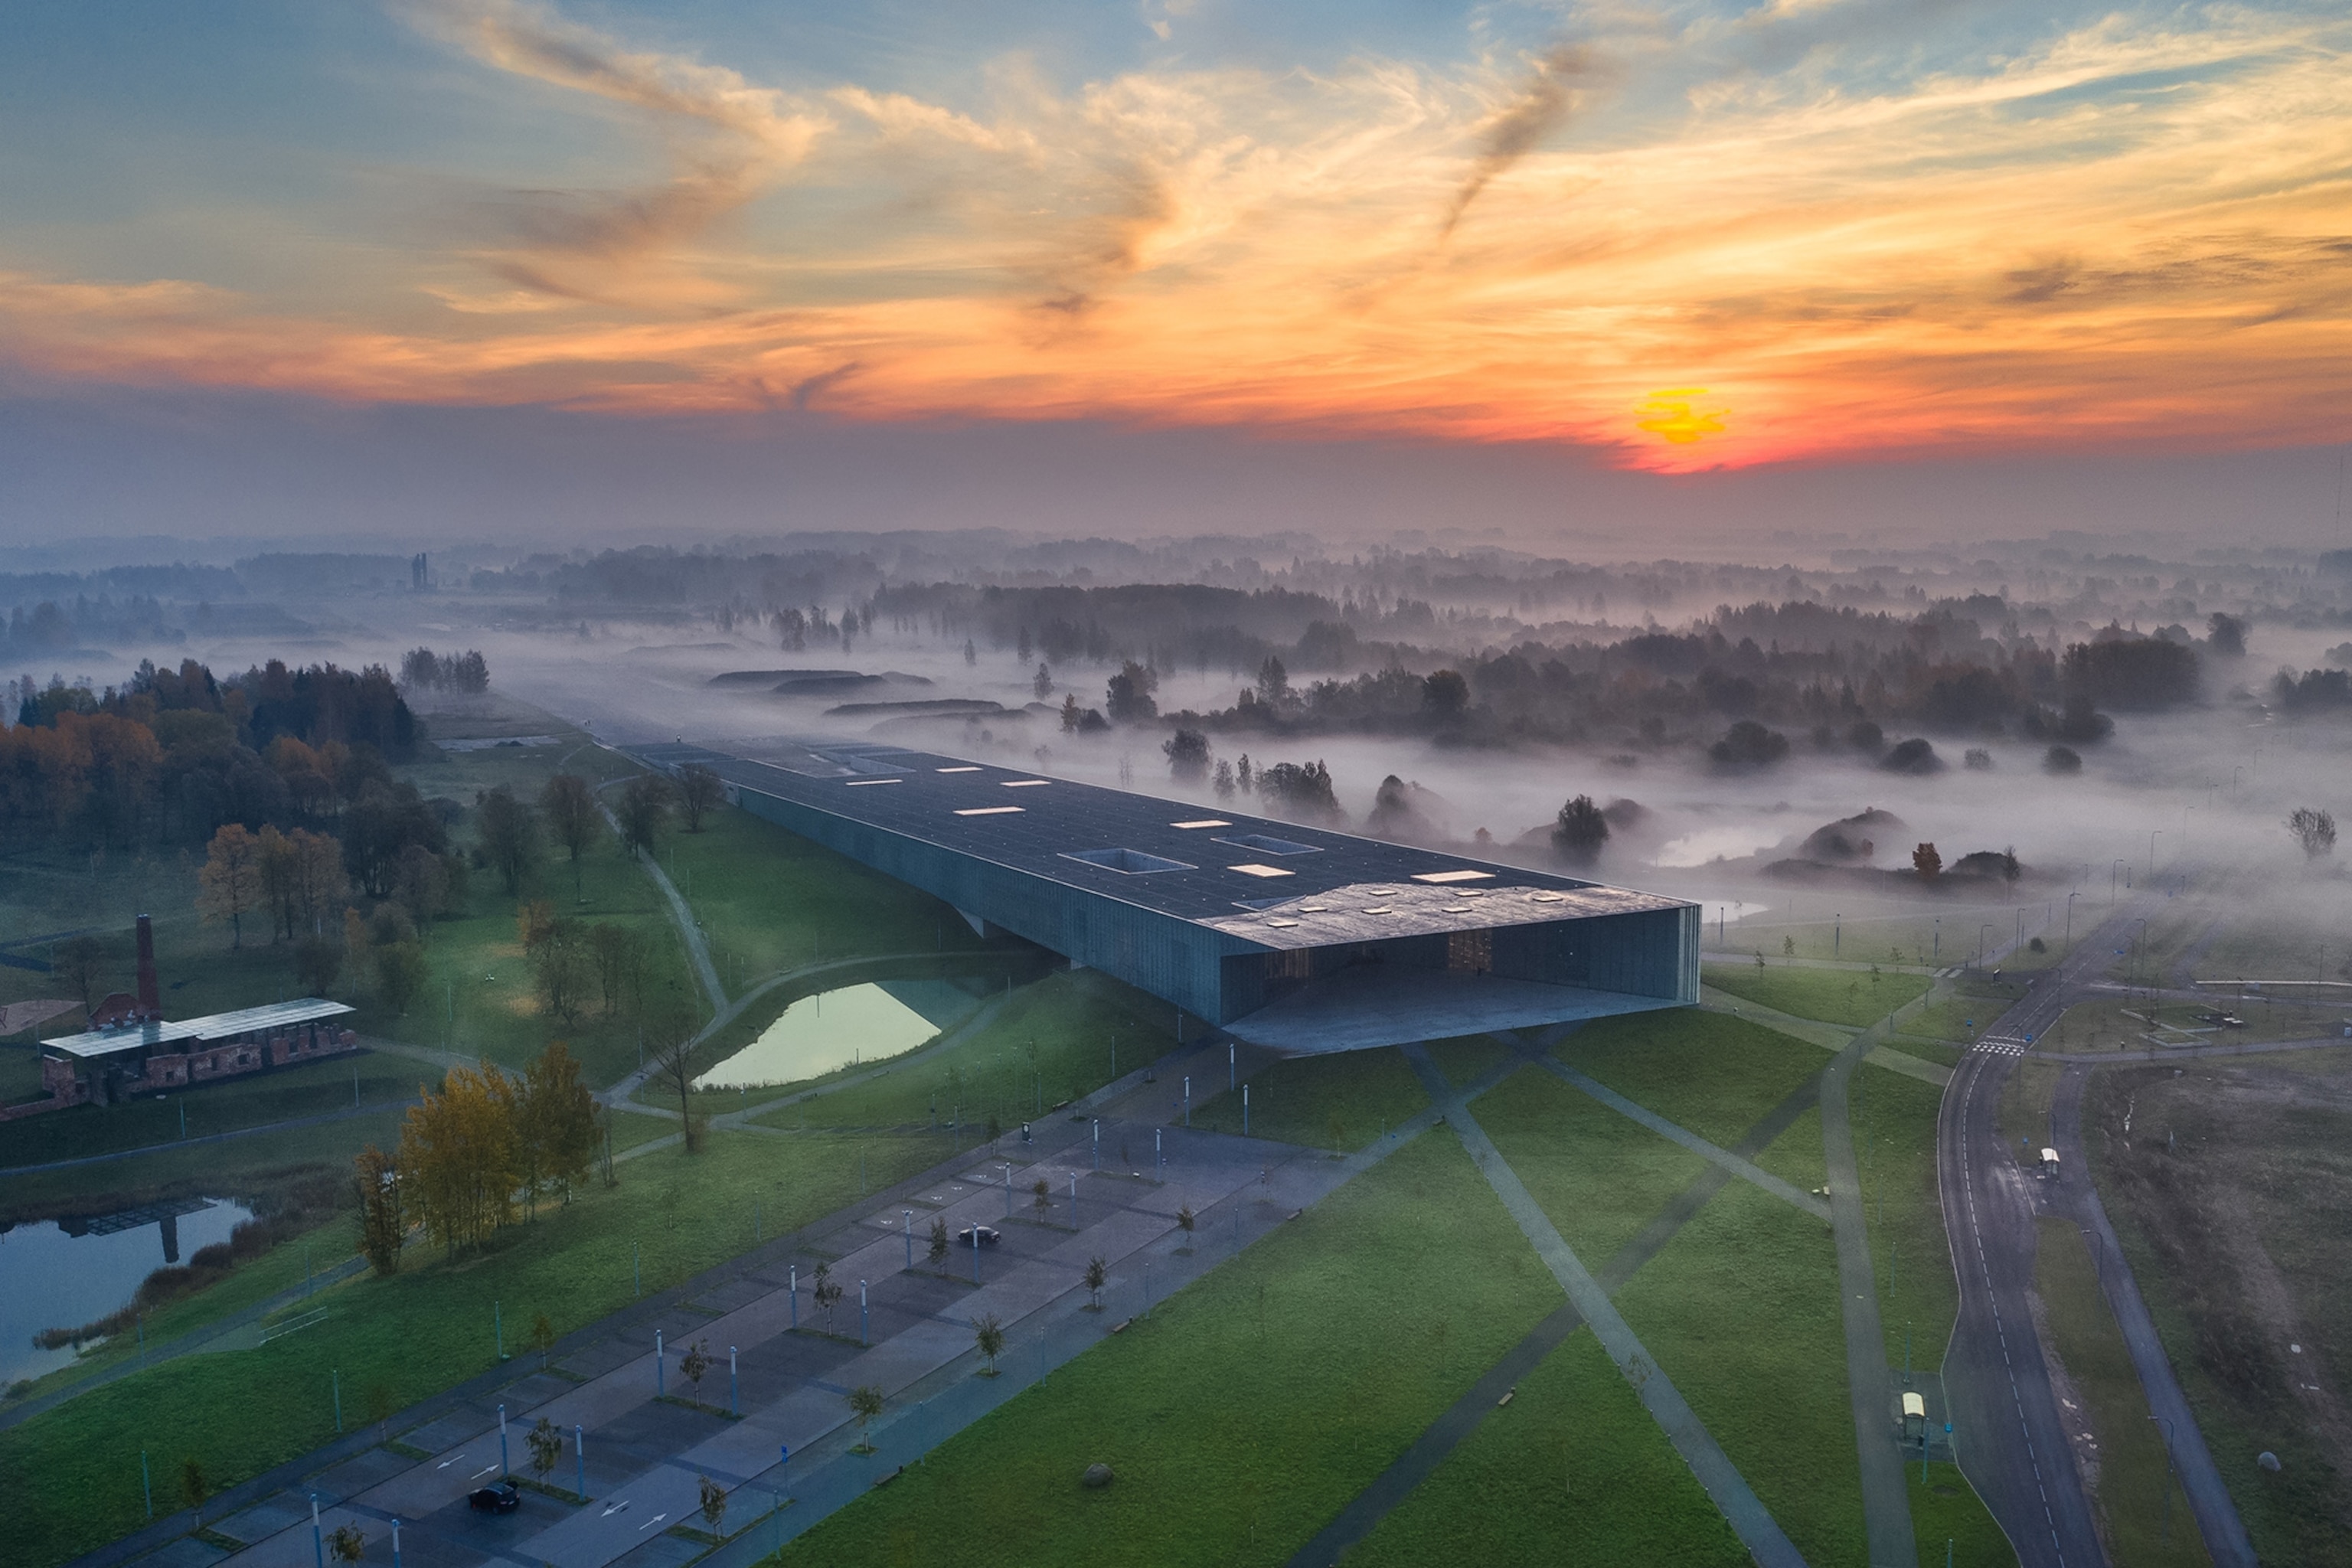 A misty fog surrounds an old aircraft hanger in Estonia